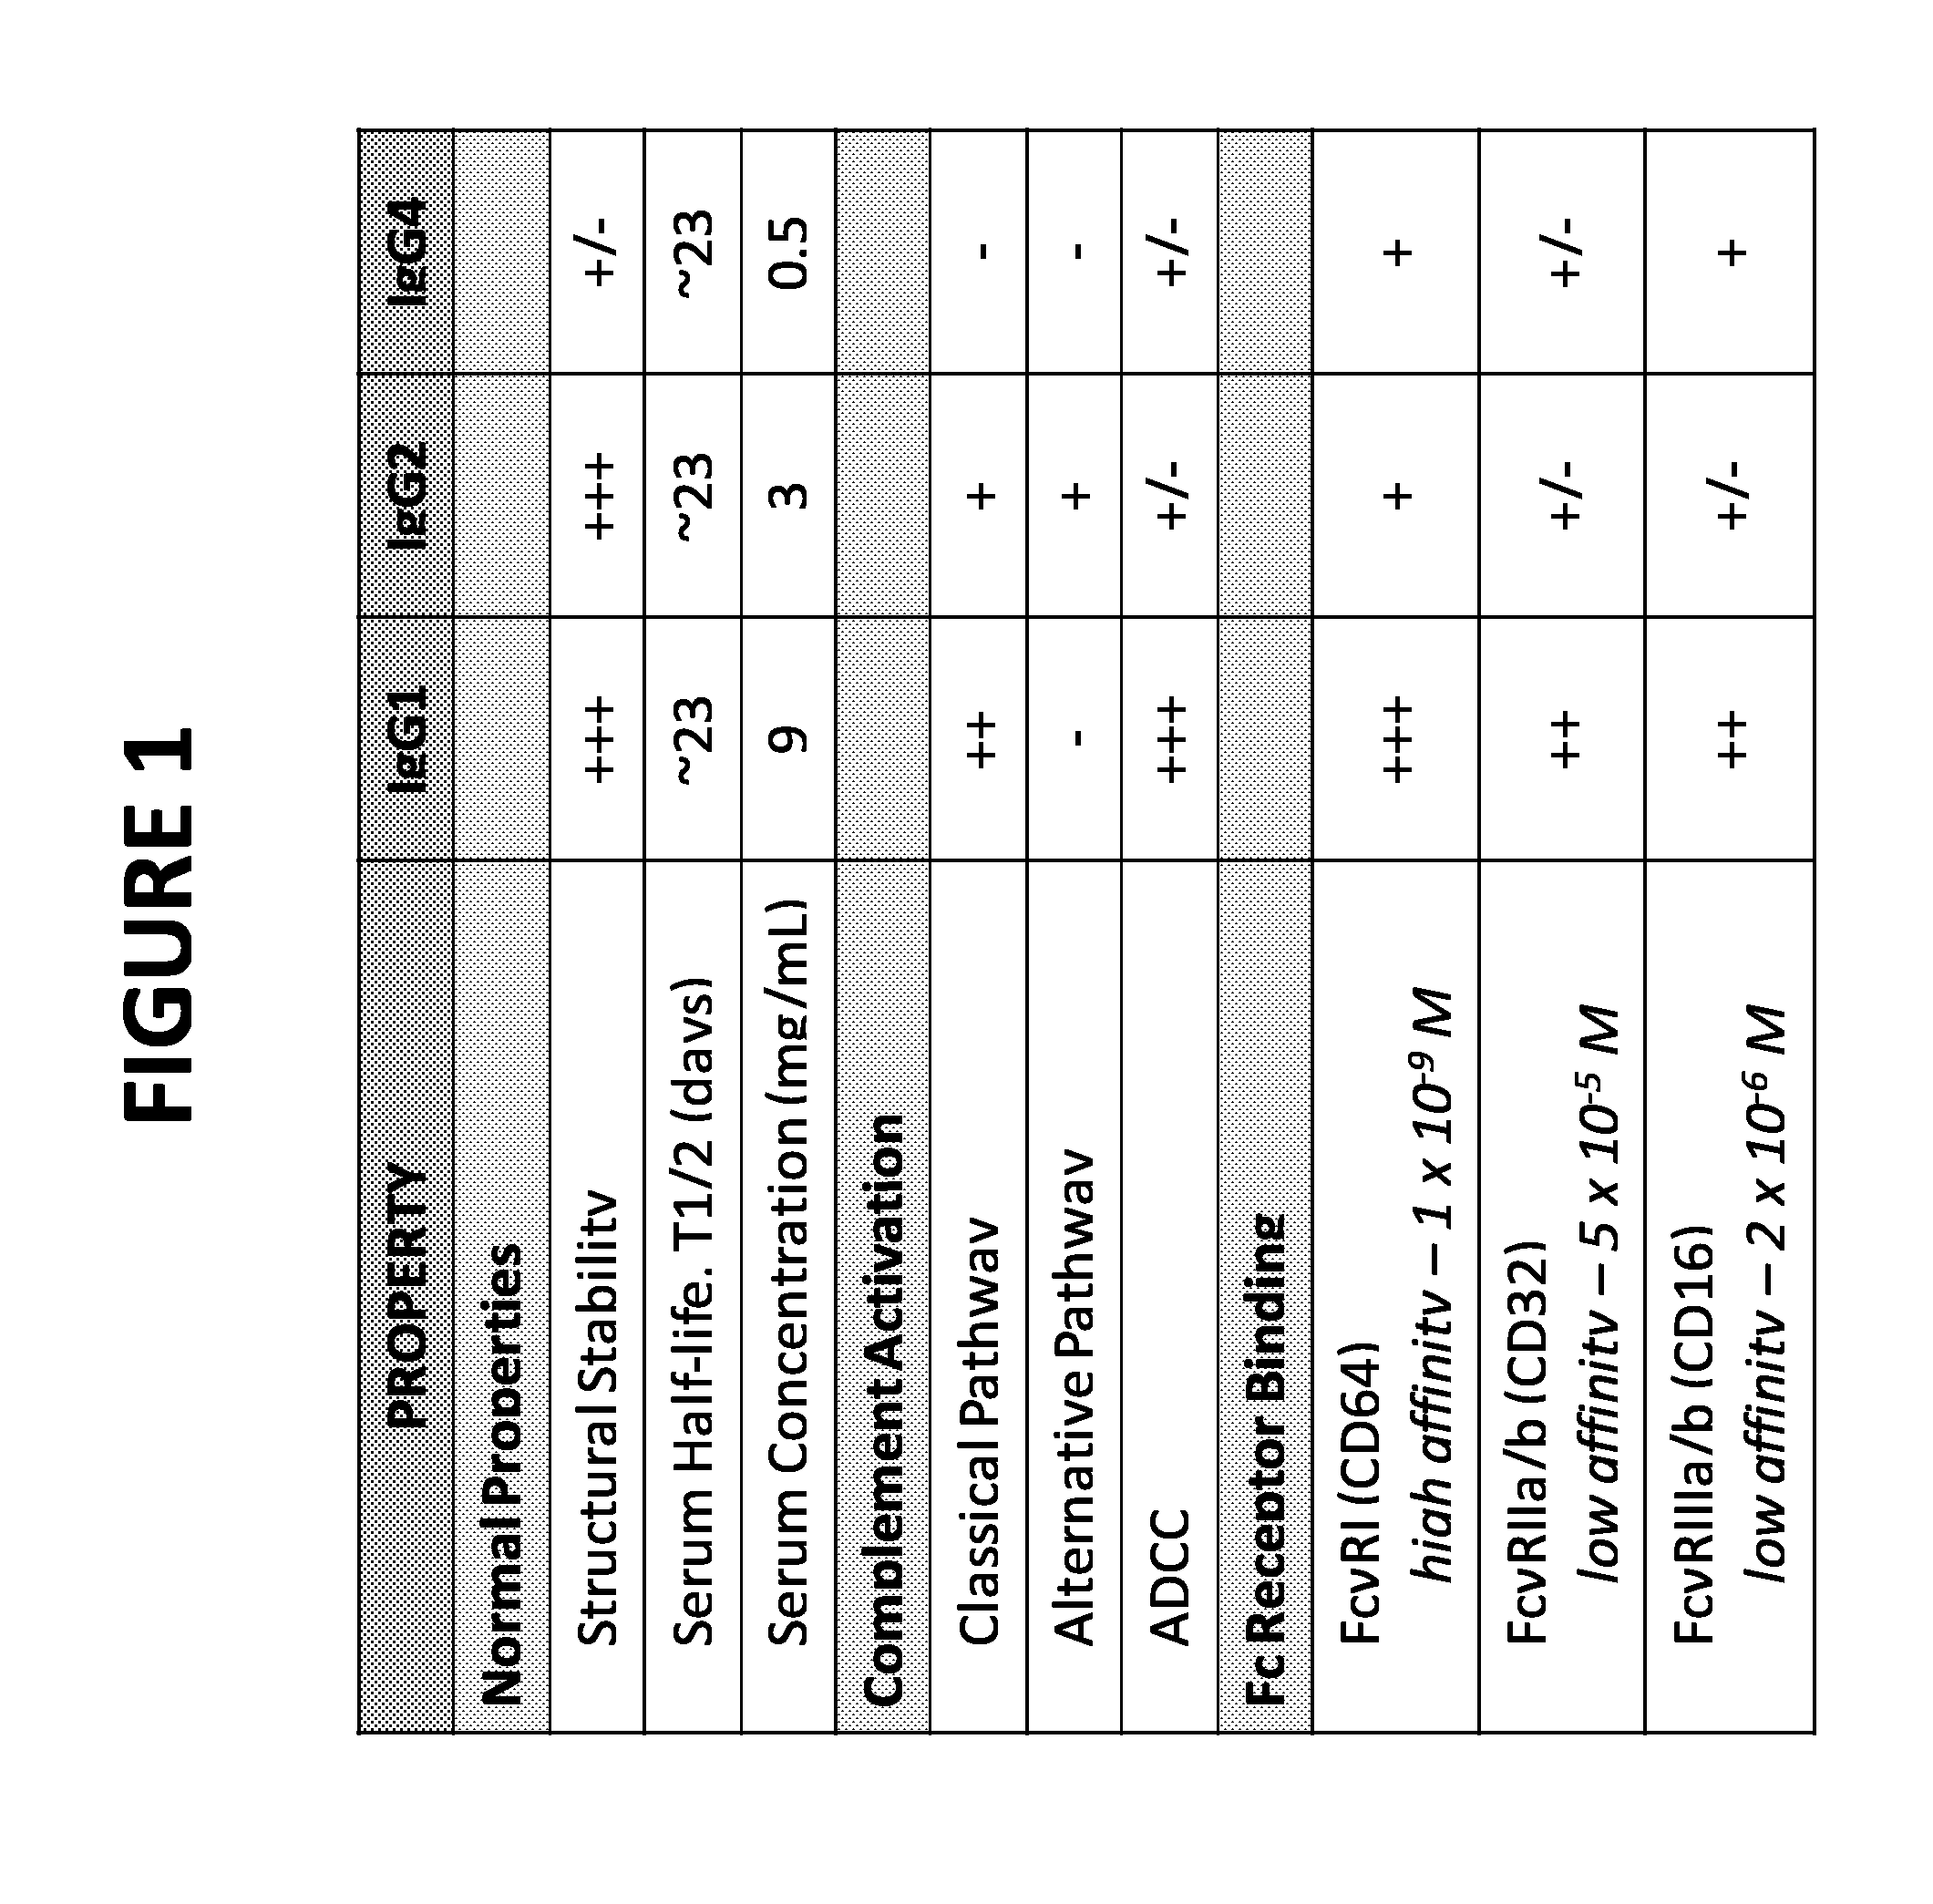 Aglycosylated human antibody and fusion protein and uses thereof